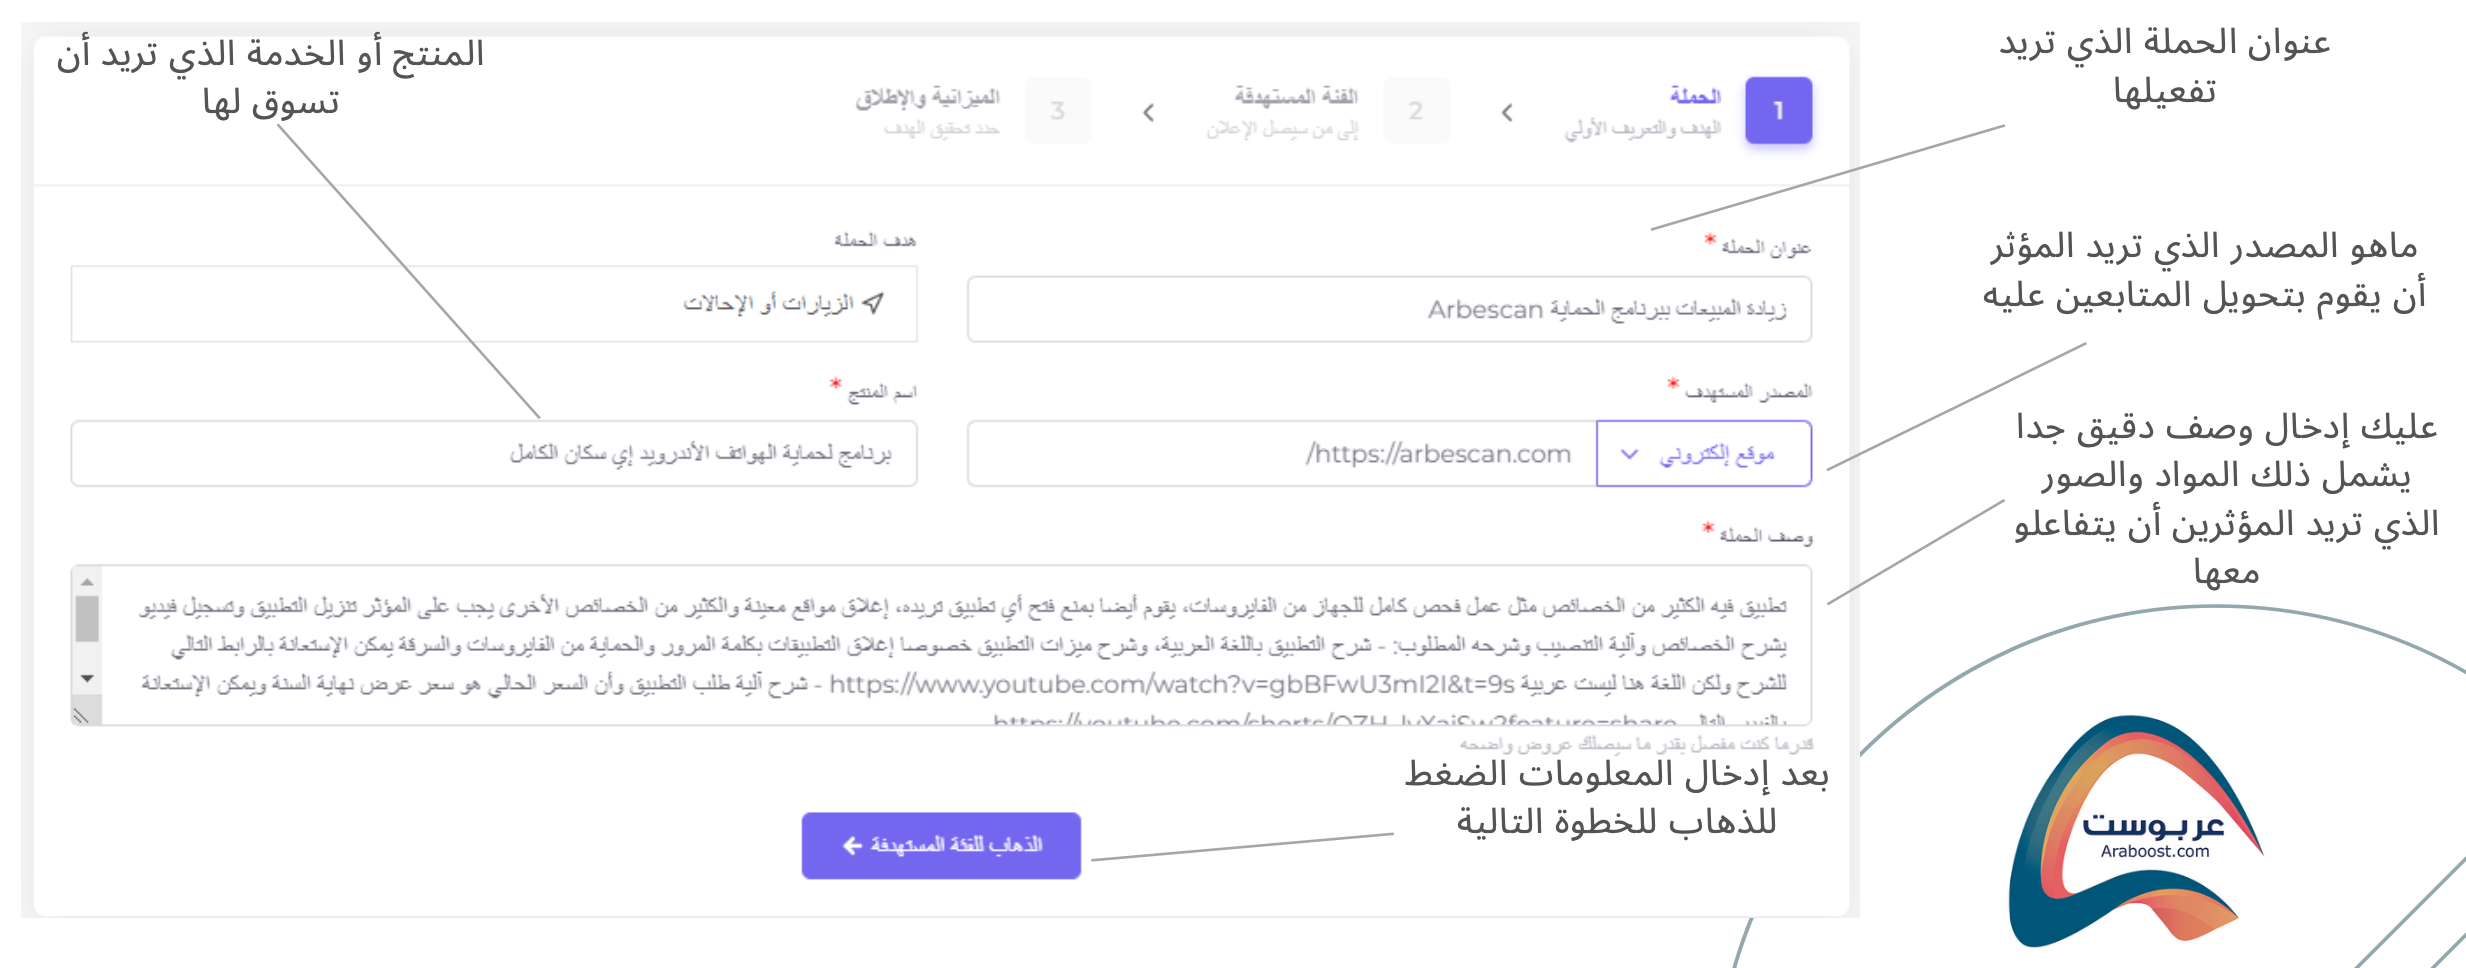 how to run influencer marketing campaign with araboost step 1